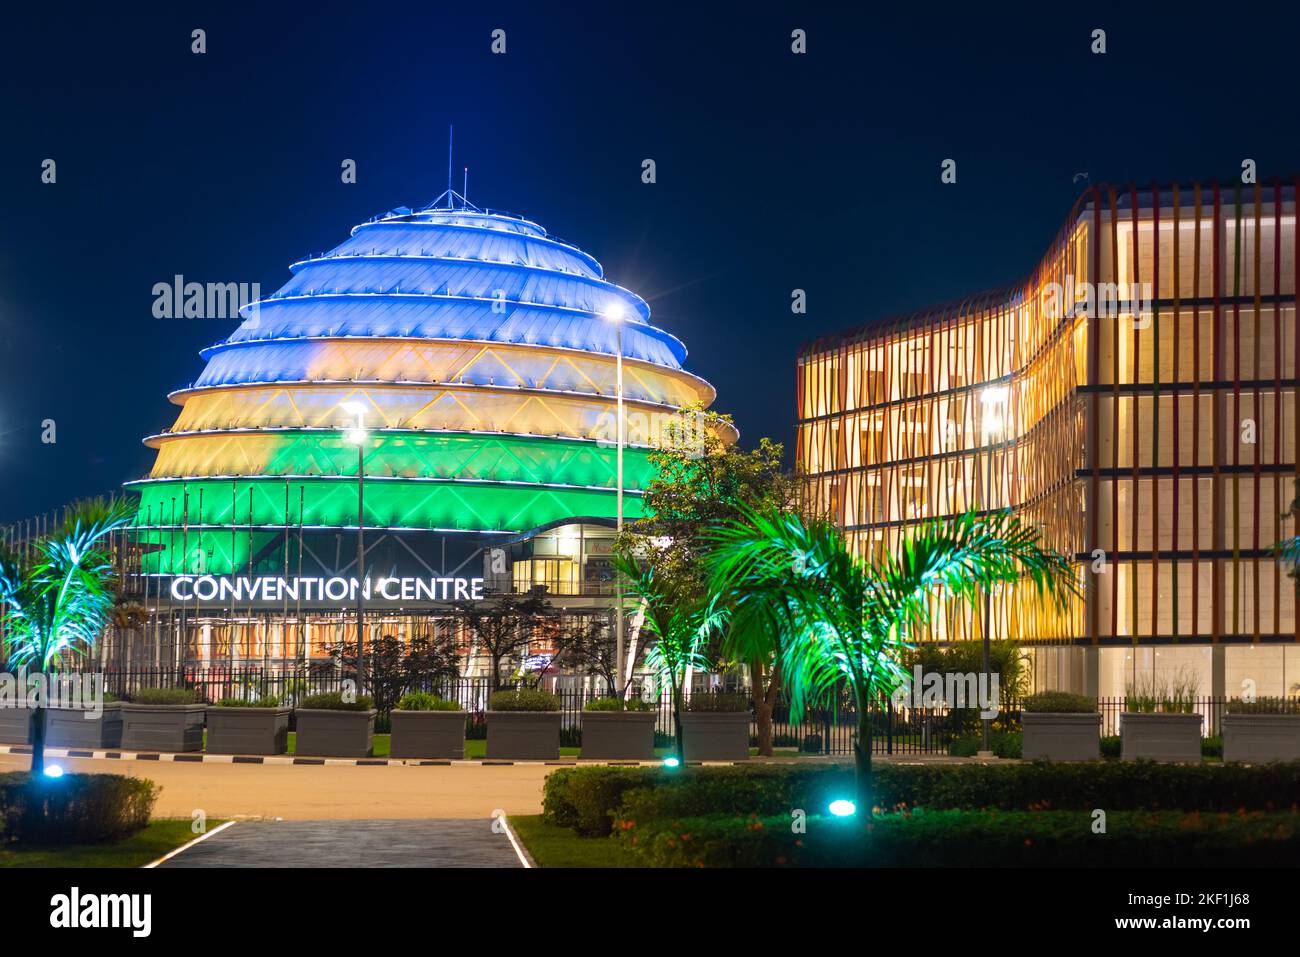 Kigali, Rwanda - August 19 2022: Kigali Convention Centre at night, lit up in the colors of the Rwandan flag. The facility is designed to host a varie Stock Photo